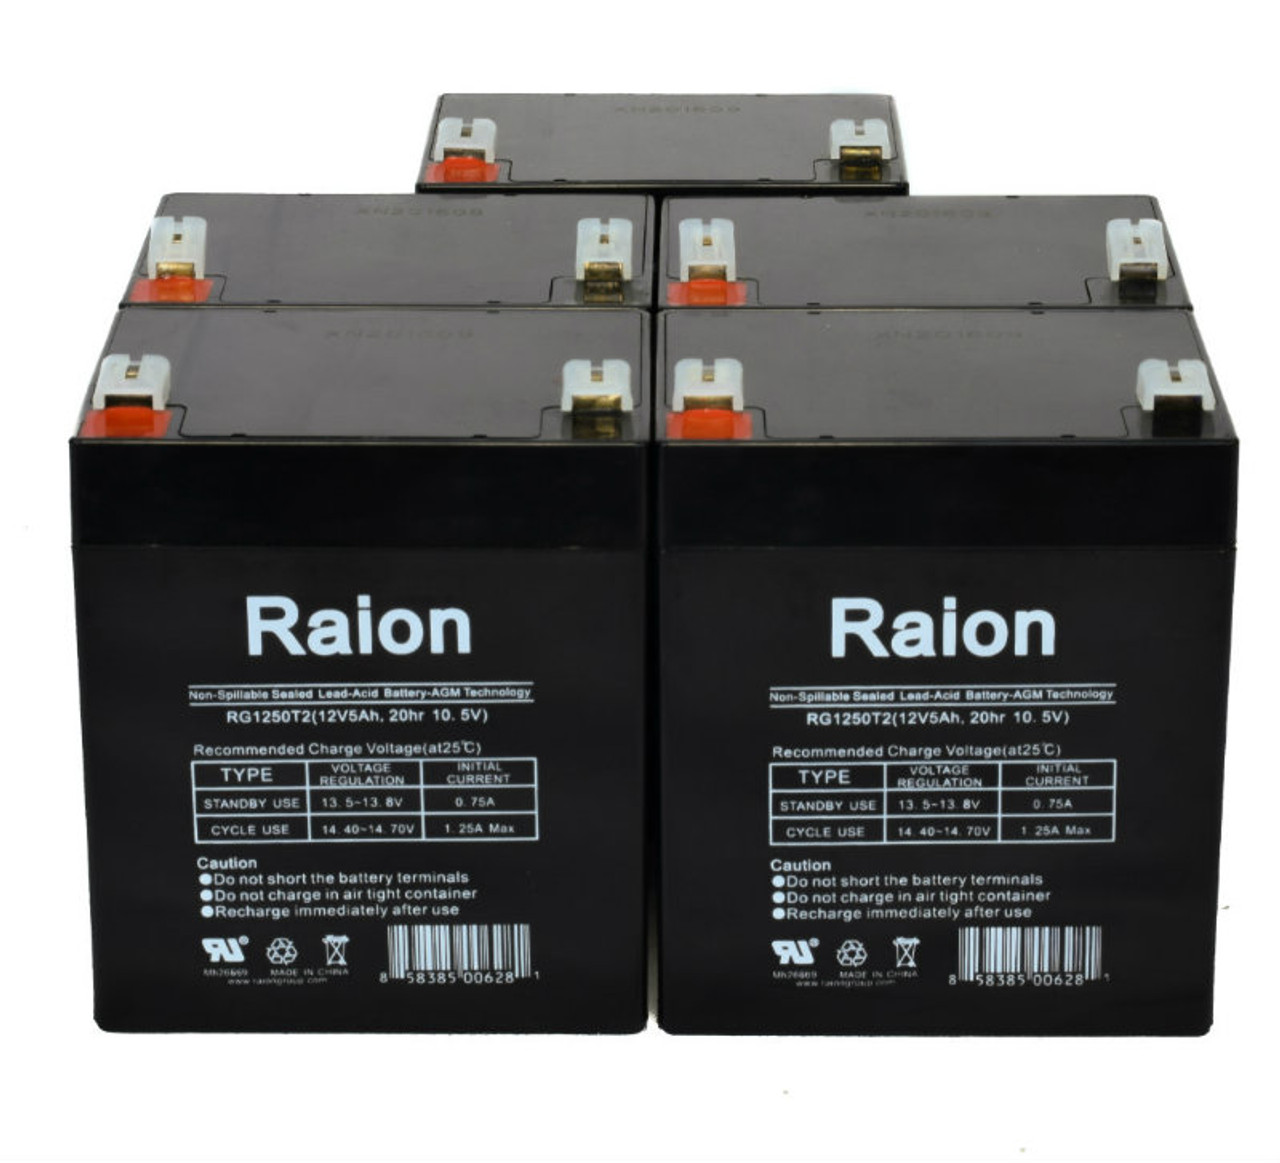 Raion Power RG1250T1 Replacement Fire Alarm Control Panel Battery for ACME Security System SDC602 - 5 Pack